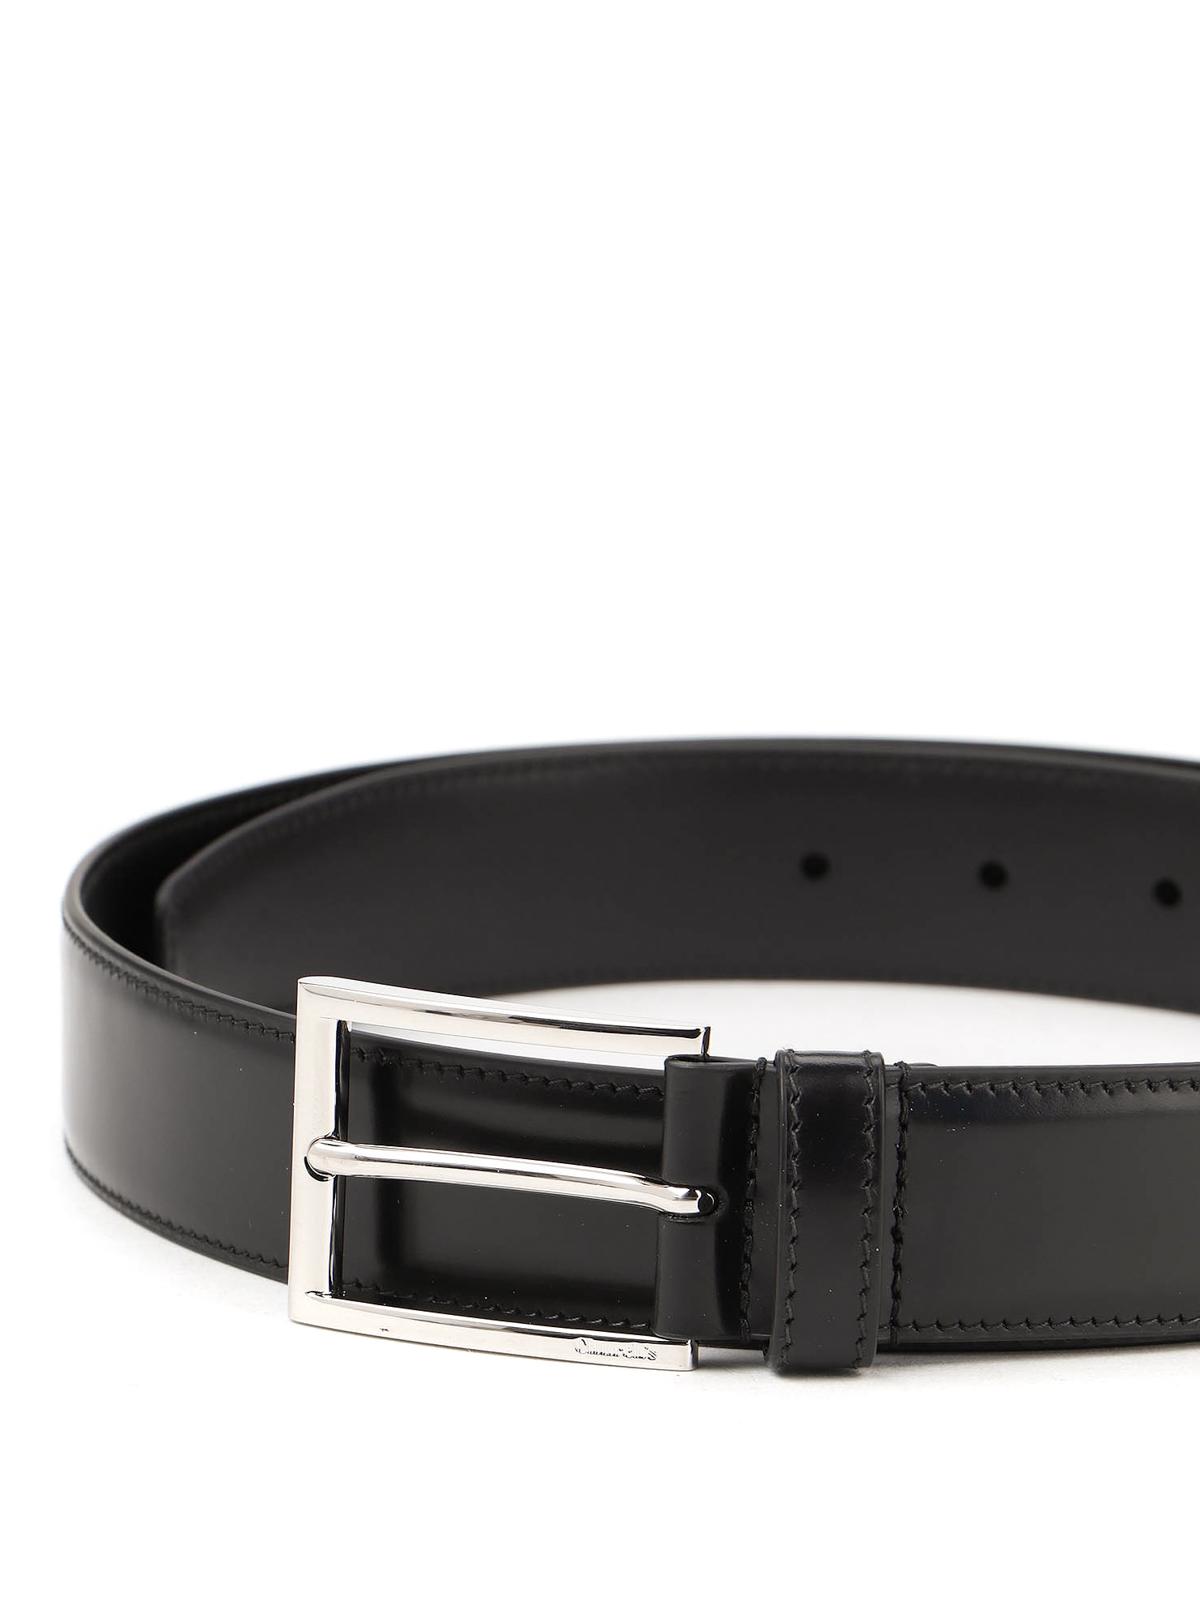 Church's Leather Square Buckle Black Belt for Men - Lyst